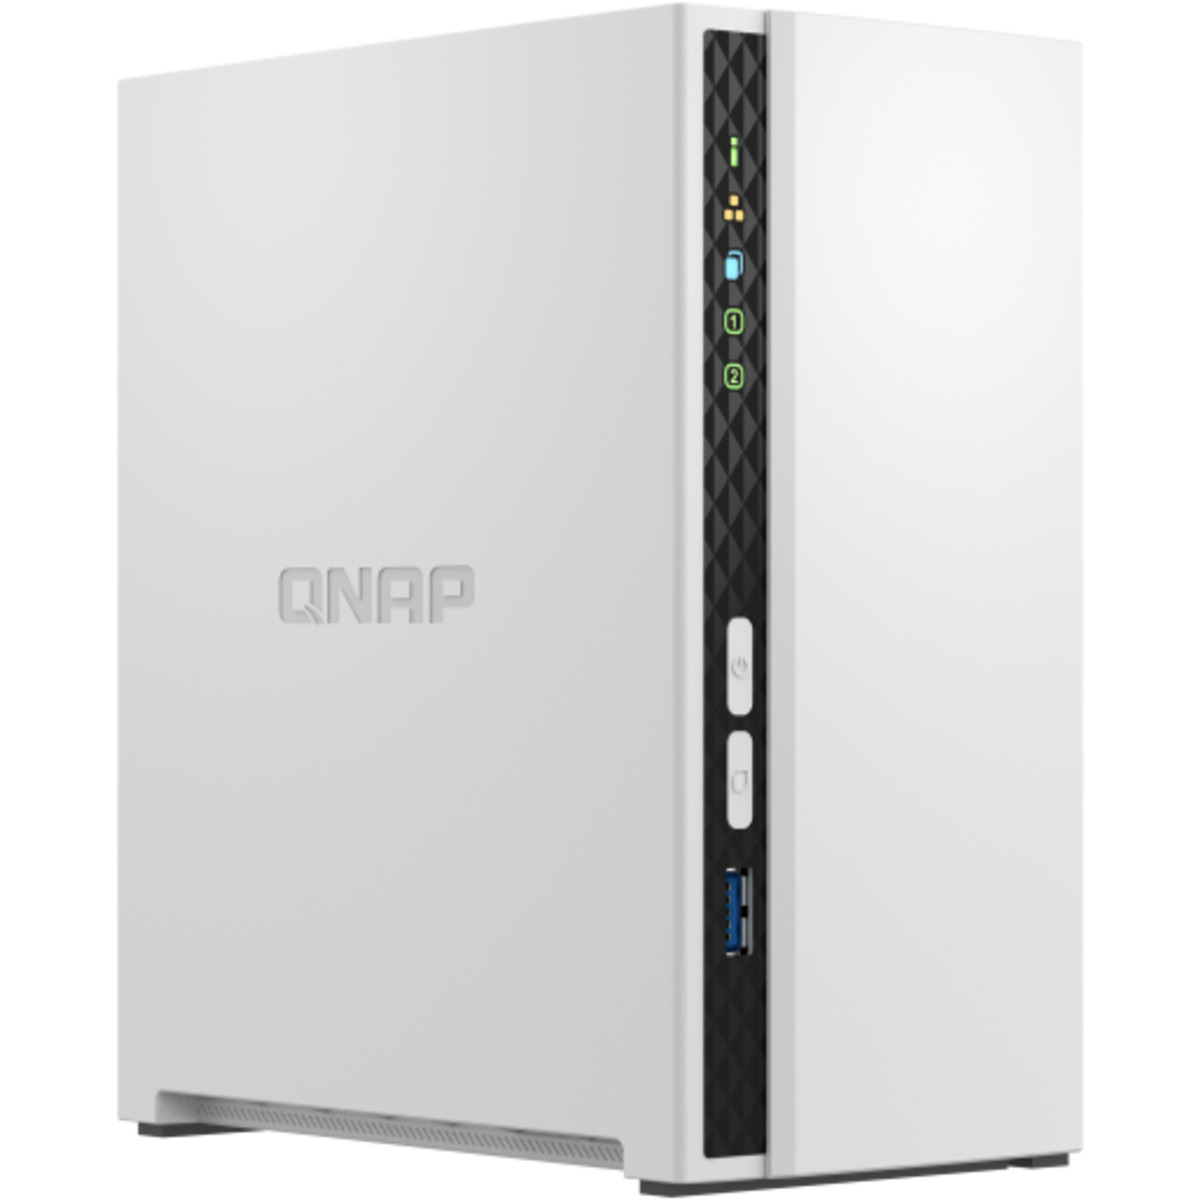 buy $356 QNAP TS-233 8tb Desktop NAS - Network Attached Storage Device 2x4000gb Toshiba MN Series MN08ADA400E 3.5 7200rpm SATA 6Gb/s HDD NAS Class Drives Installed - Burn-In Tested - ON SALE - nas headquarters buy network attached storage server device das new raid-5 free shipping simply usa TS-233